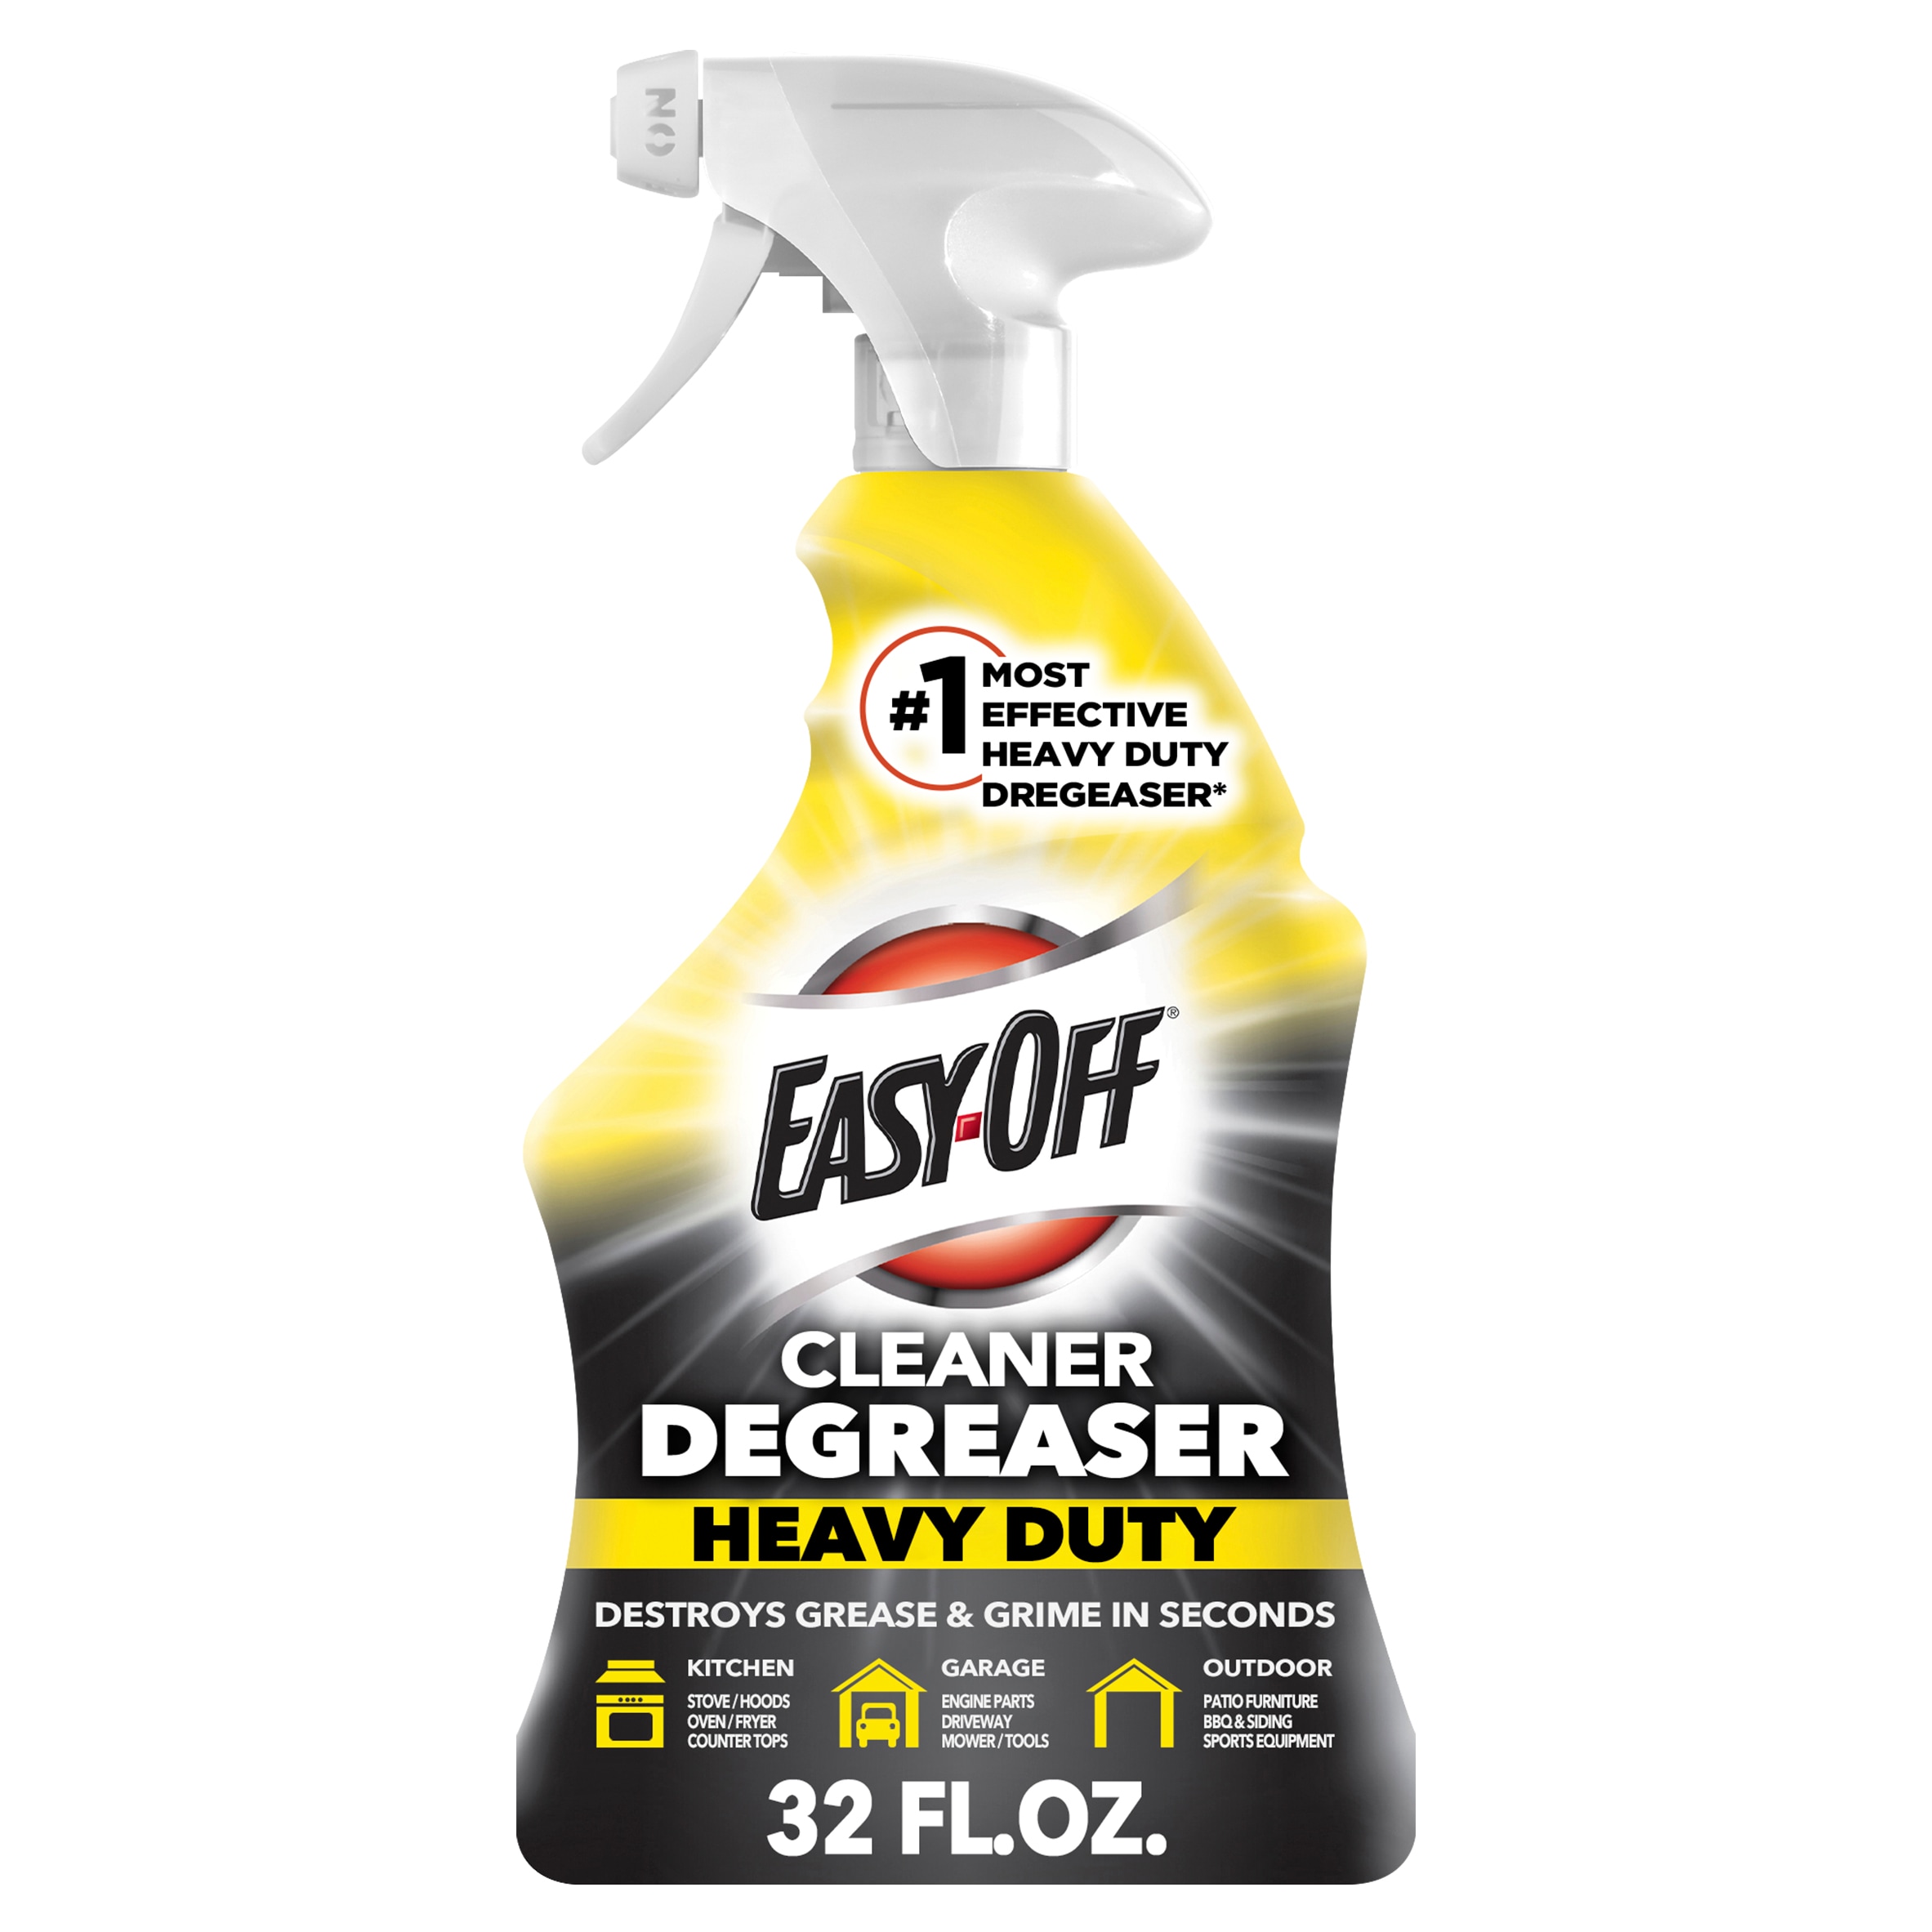 Heavy Duty Degreaser Power Washing Cleaner